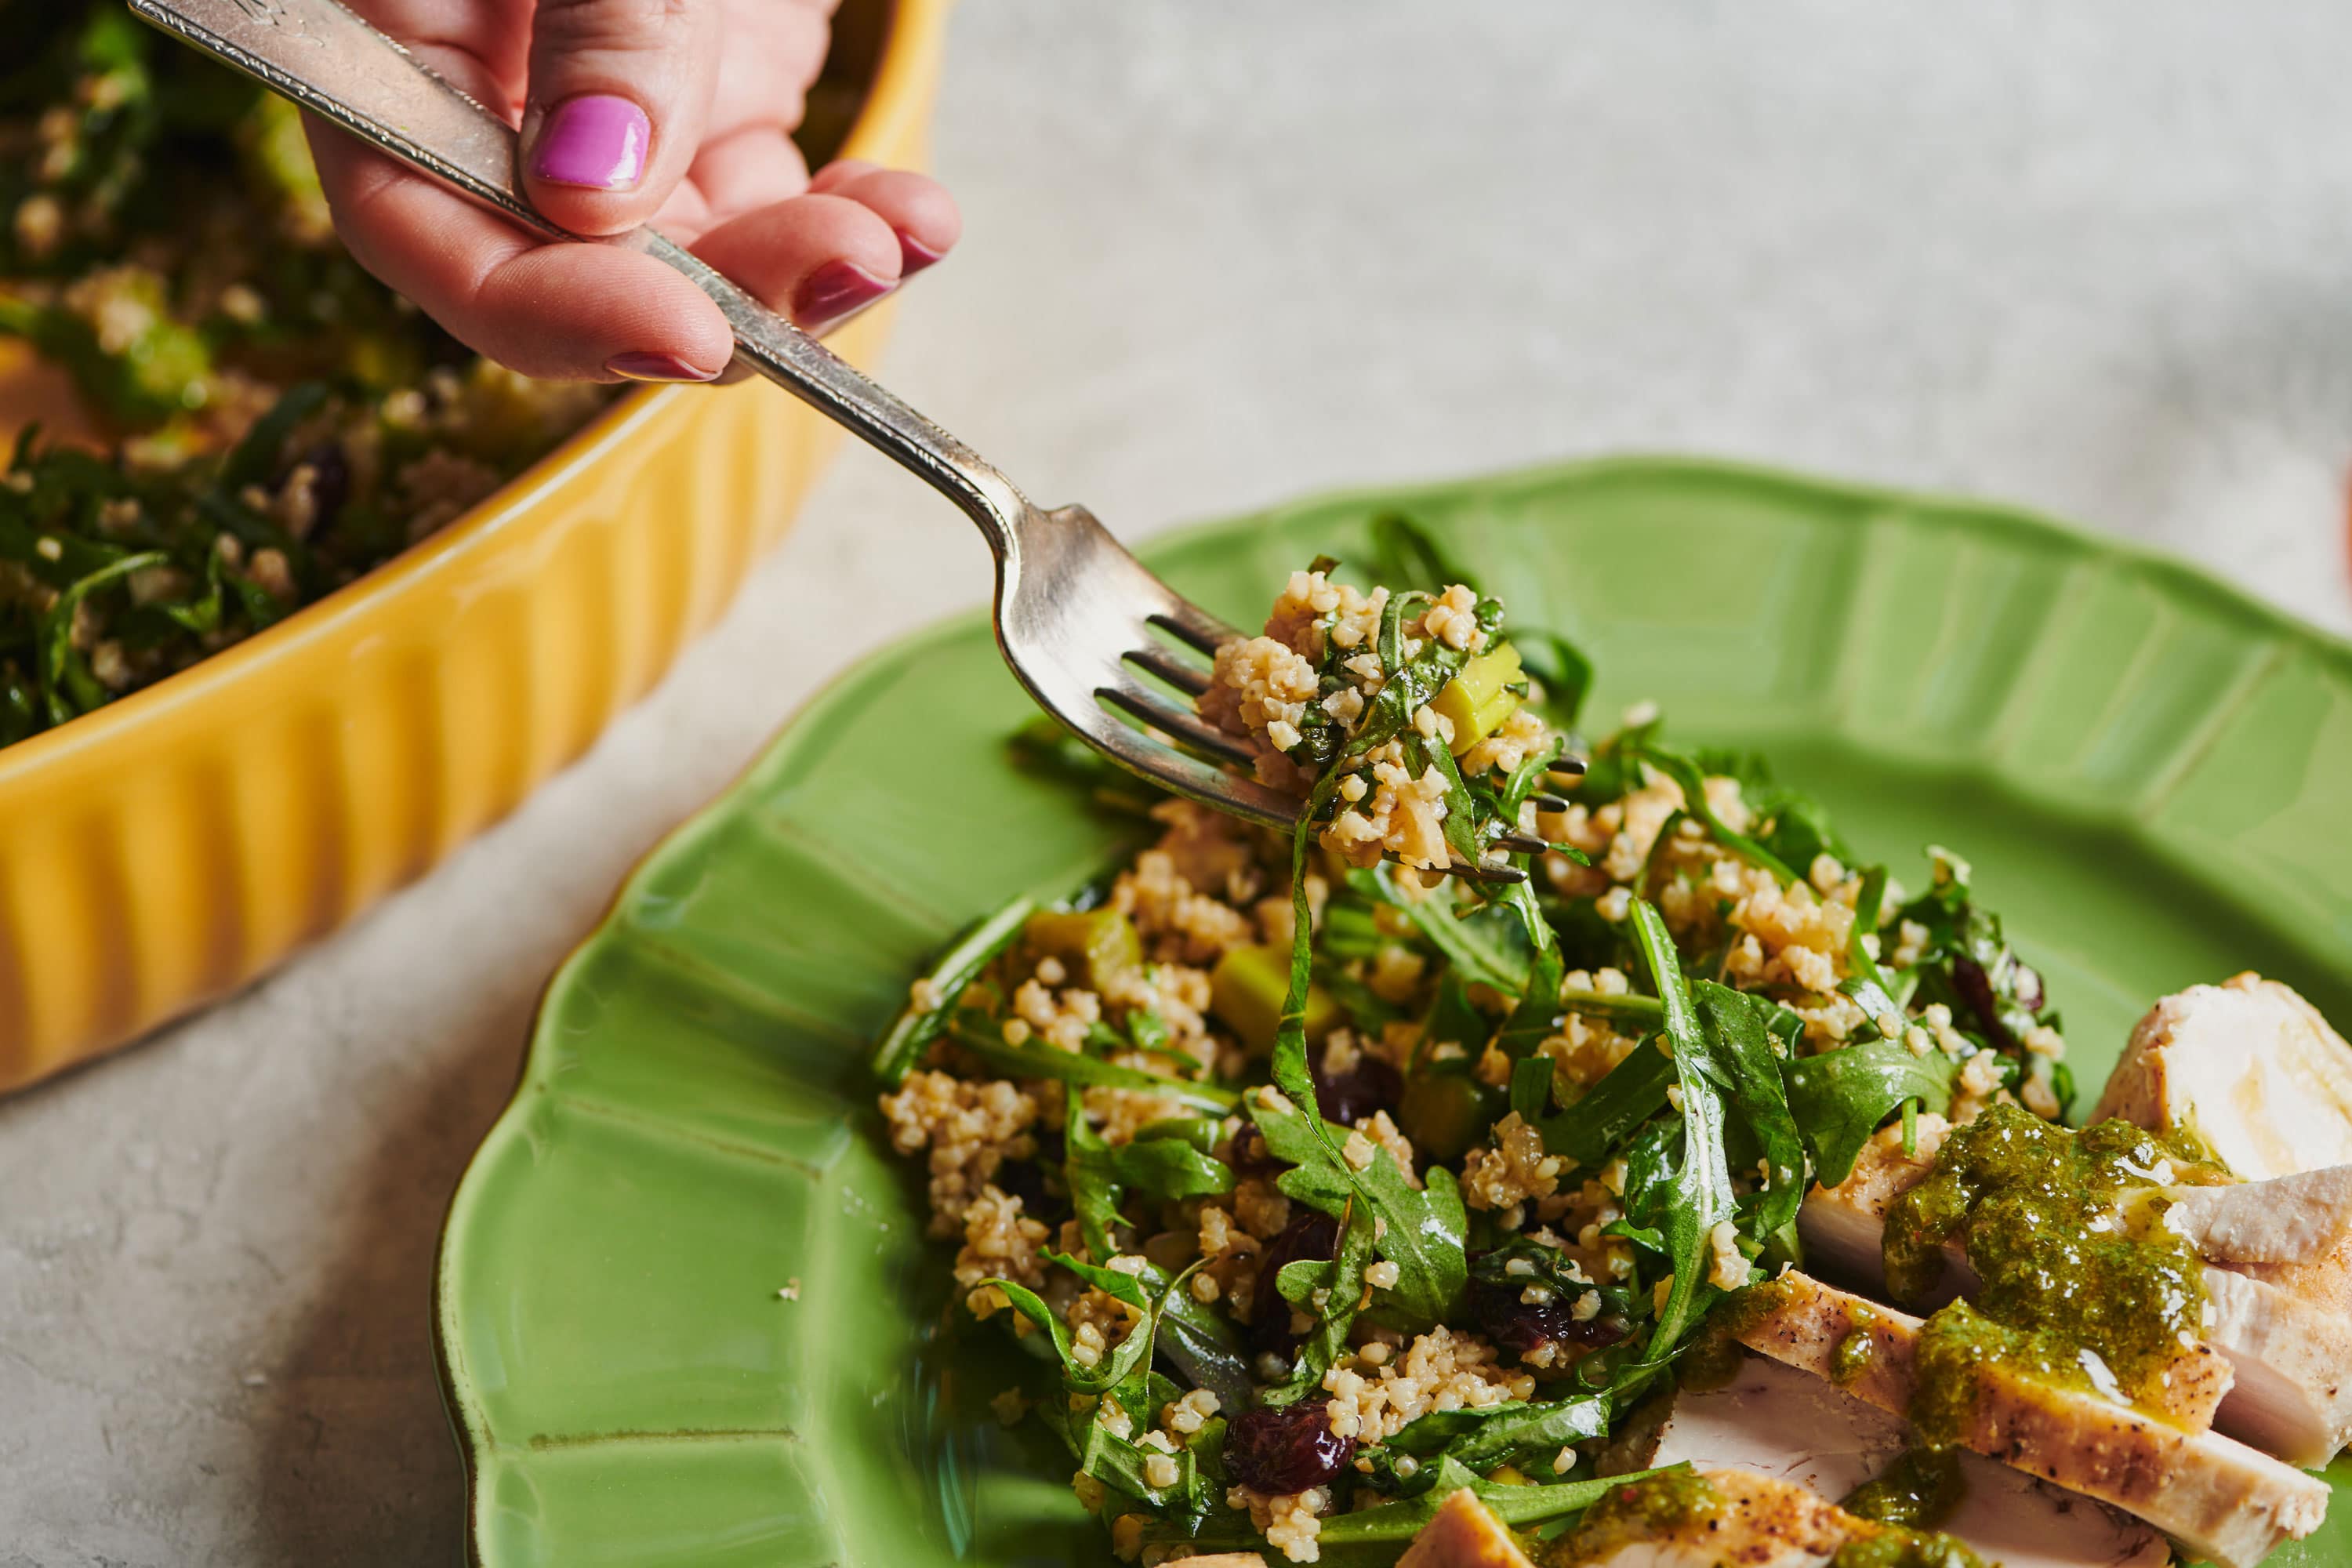 Woman scooping Millet and Greens Salad with a fork.